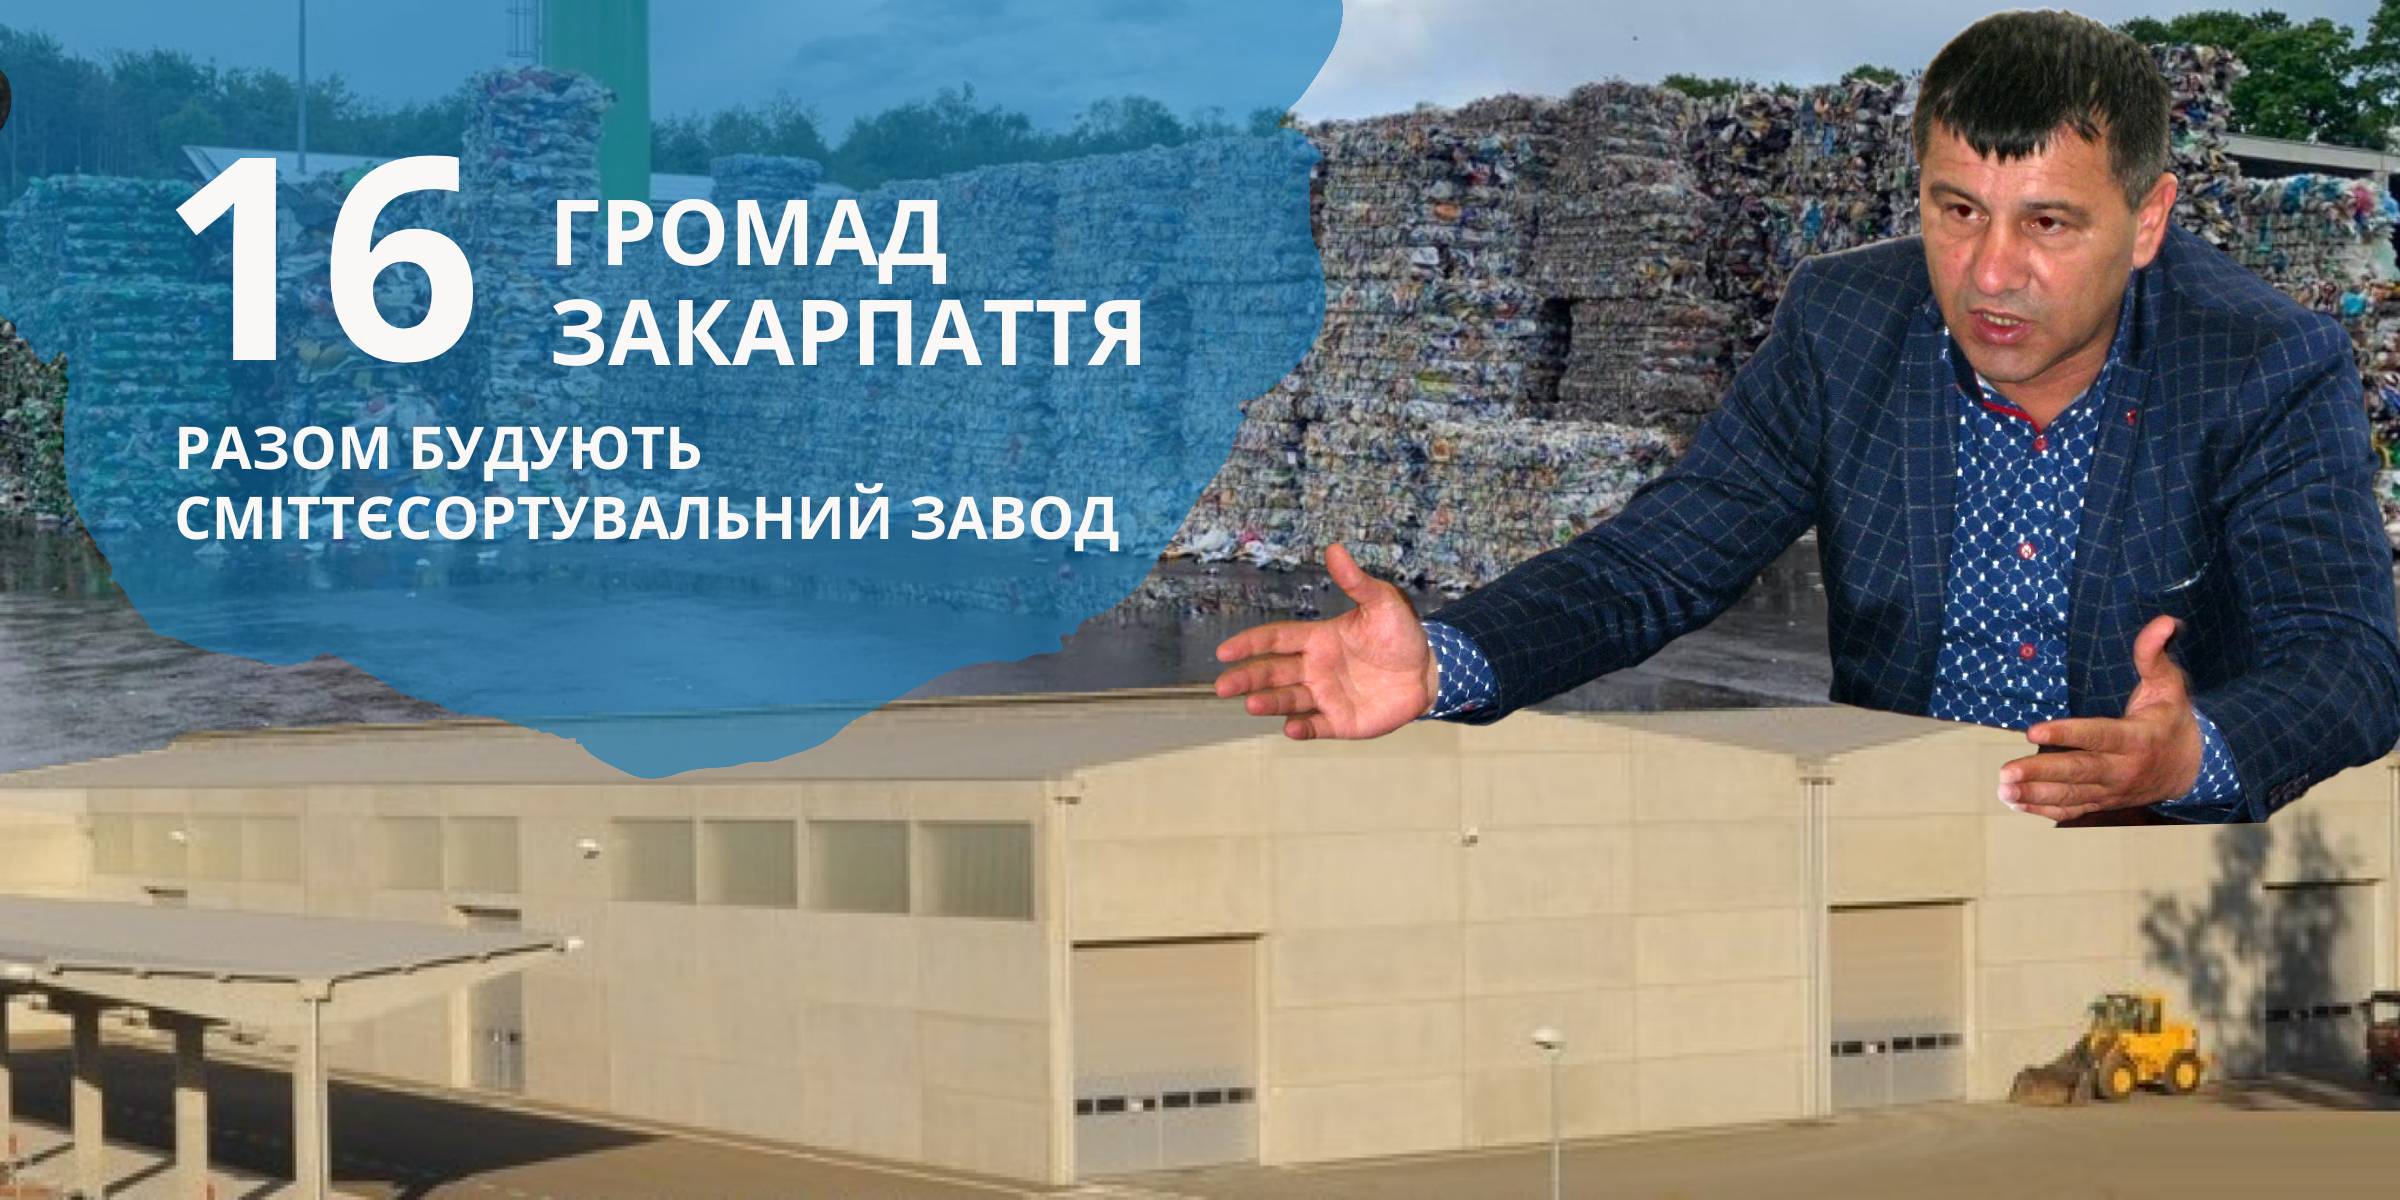 Inter-municipal wonder. 16 municipalities of the Zakarpatya oblast are jointly constructing a waste sorting plant